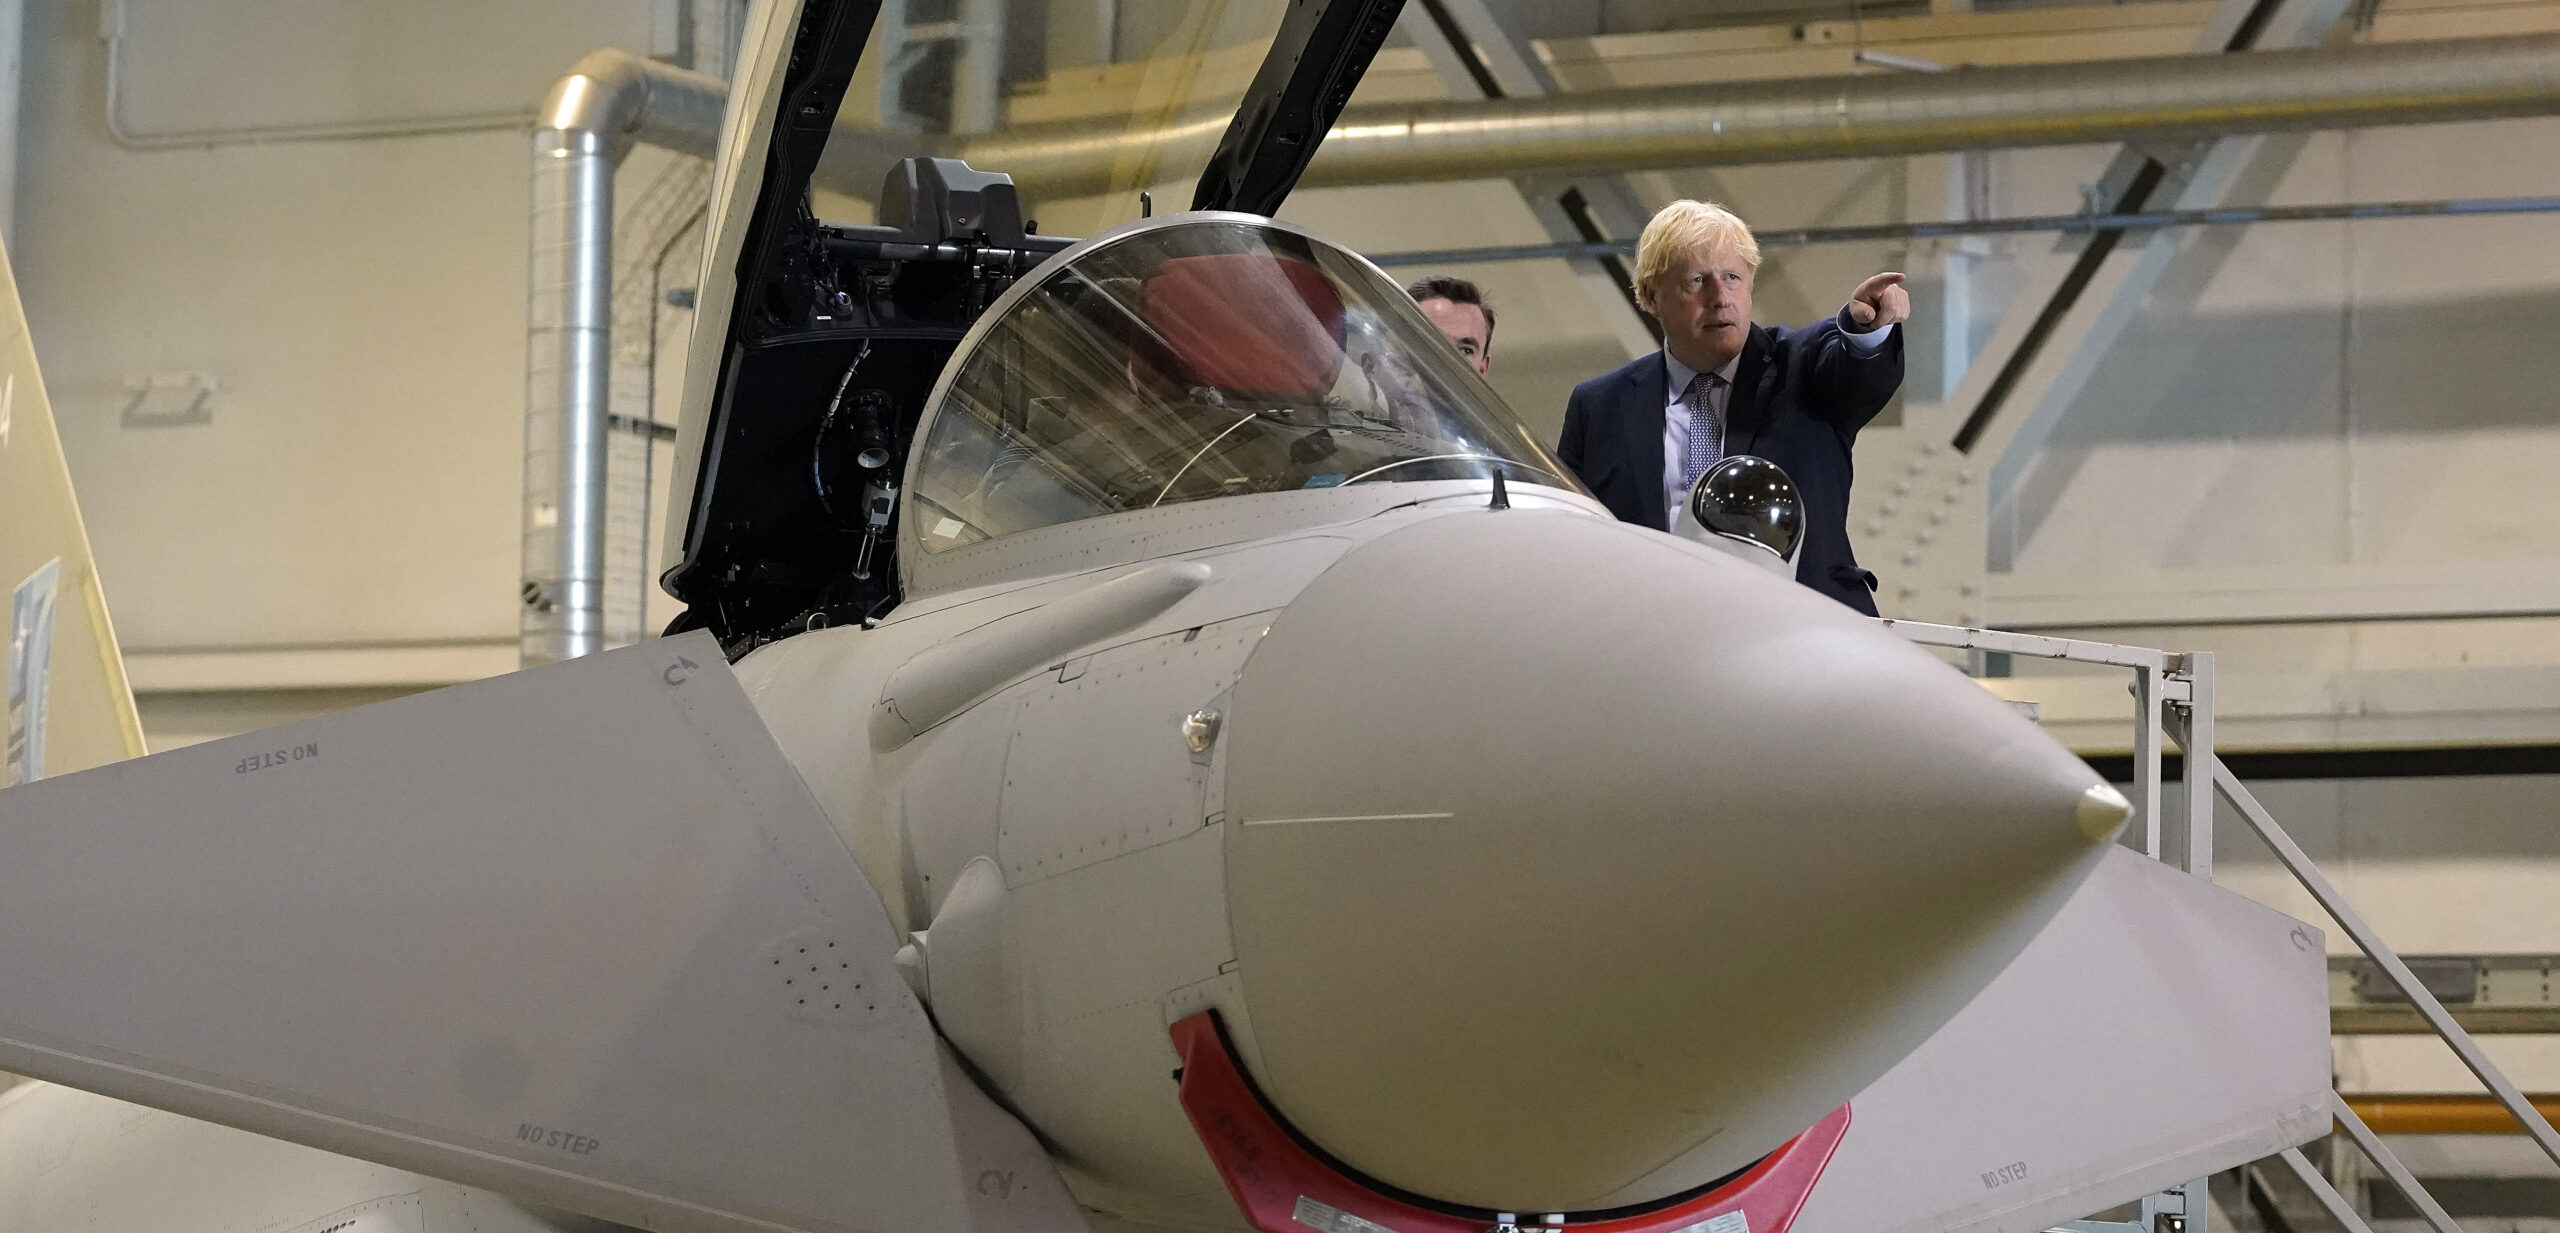 Boris Johnson standing next to a pilot sitting in Typhoon cockpit in a hangar. Johnson points to his left.